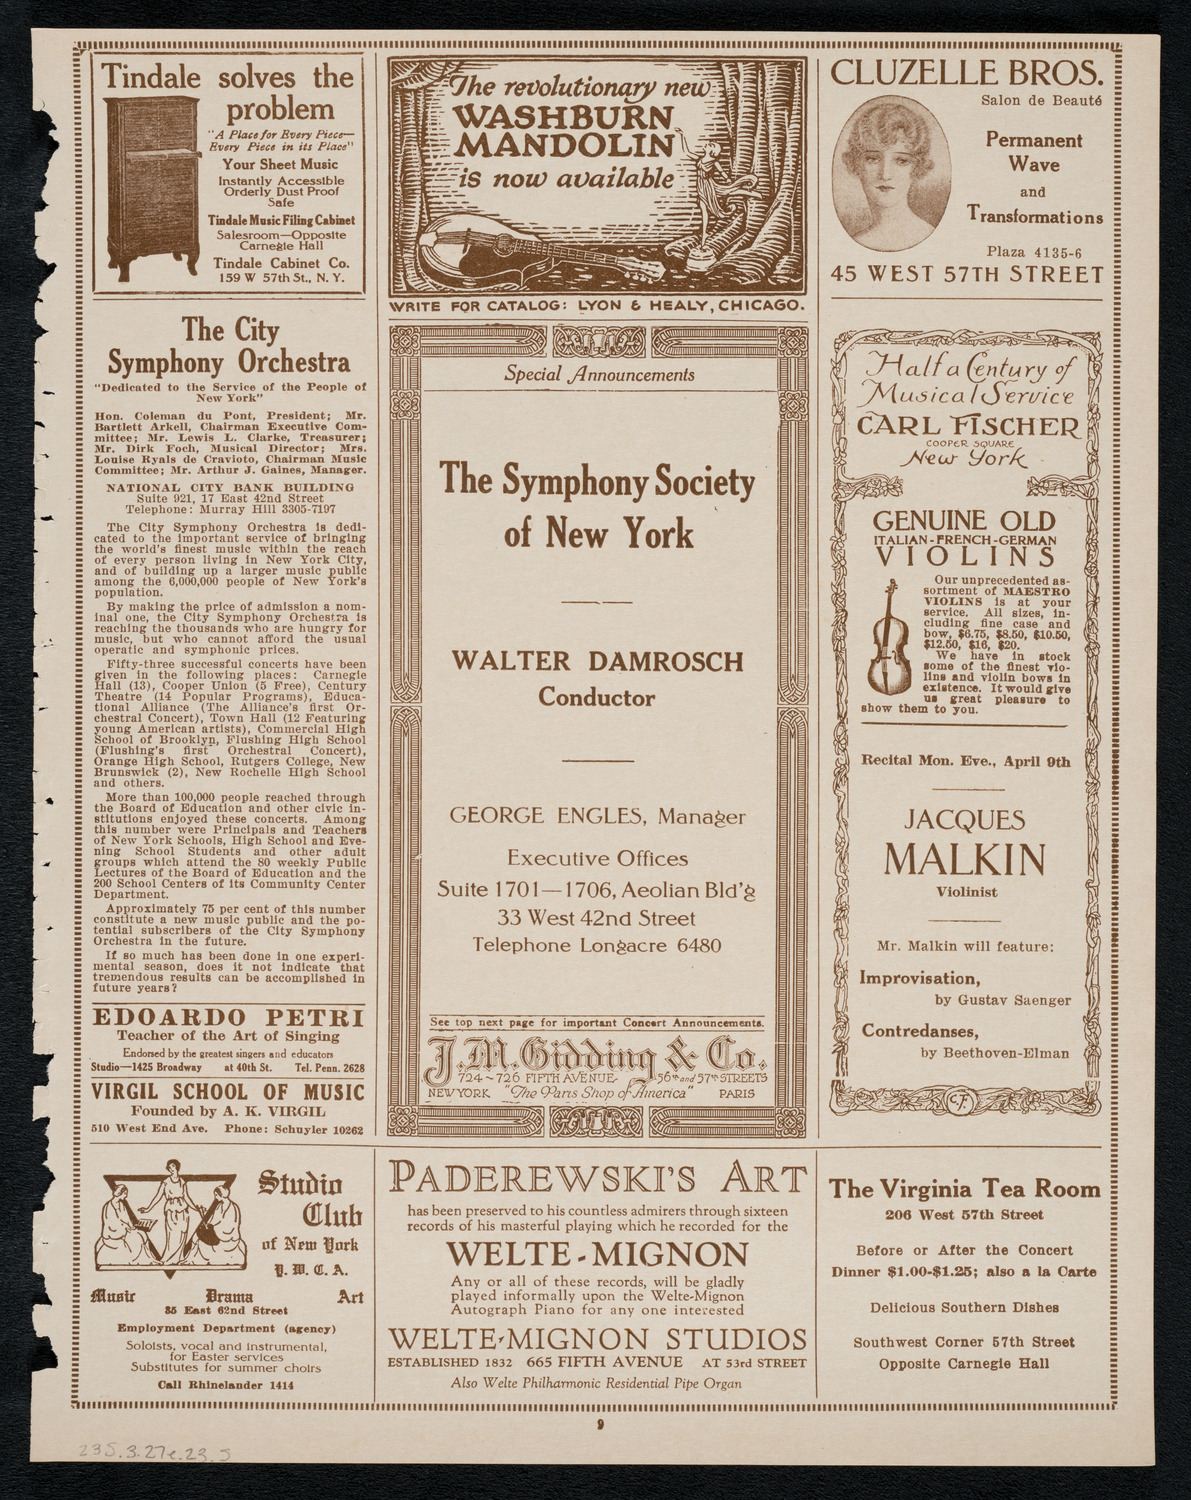 Universal Negro Improvement Association Meeting and Concert, March 27, 1923, program page 9